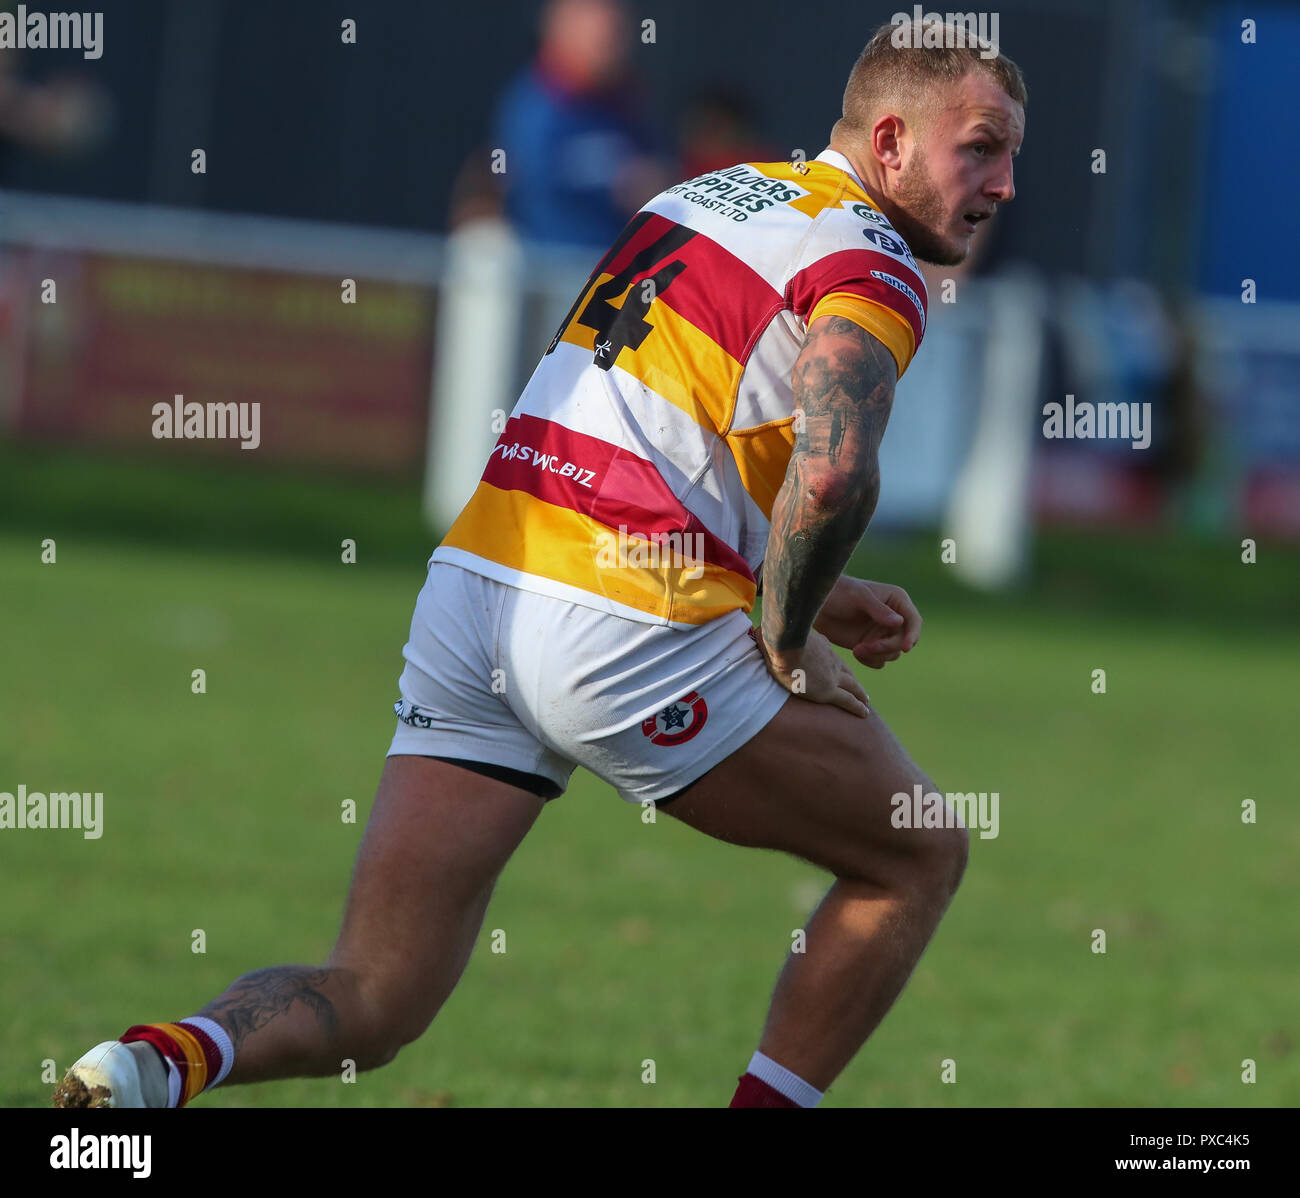 20.10.2018 Hinckley, Leicester, England. Rugby Union, Hinckley rfc v Fylde rfc.  Henry Hadfield in action for Fylde      during the RFU National League 2 North (NL2N) game played at the Leicester  Road Stadium.    © Phil Hutchinson / Alamy Live News Stock Photo